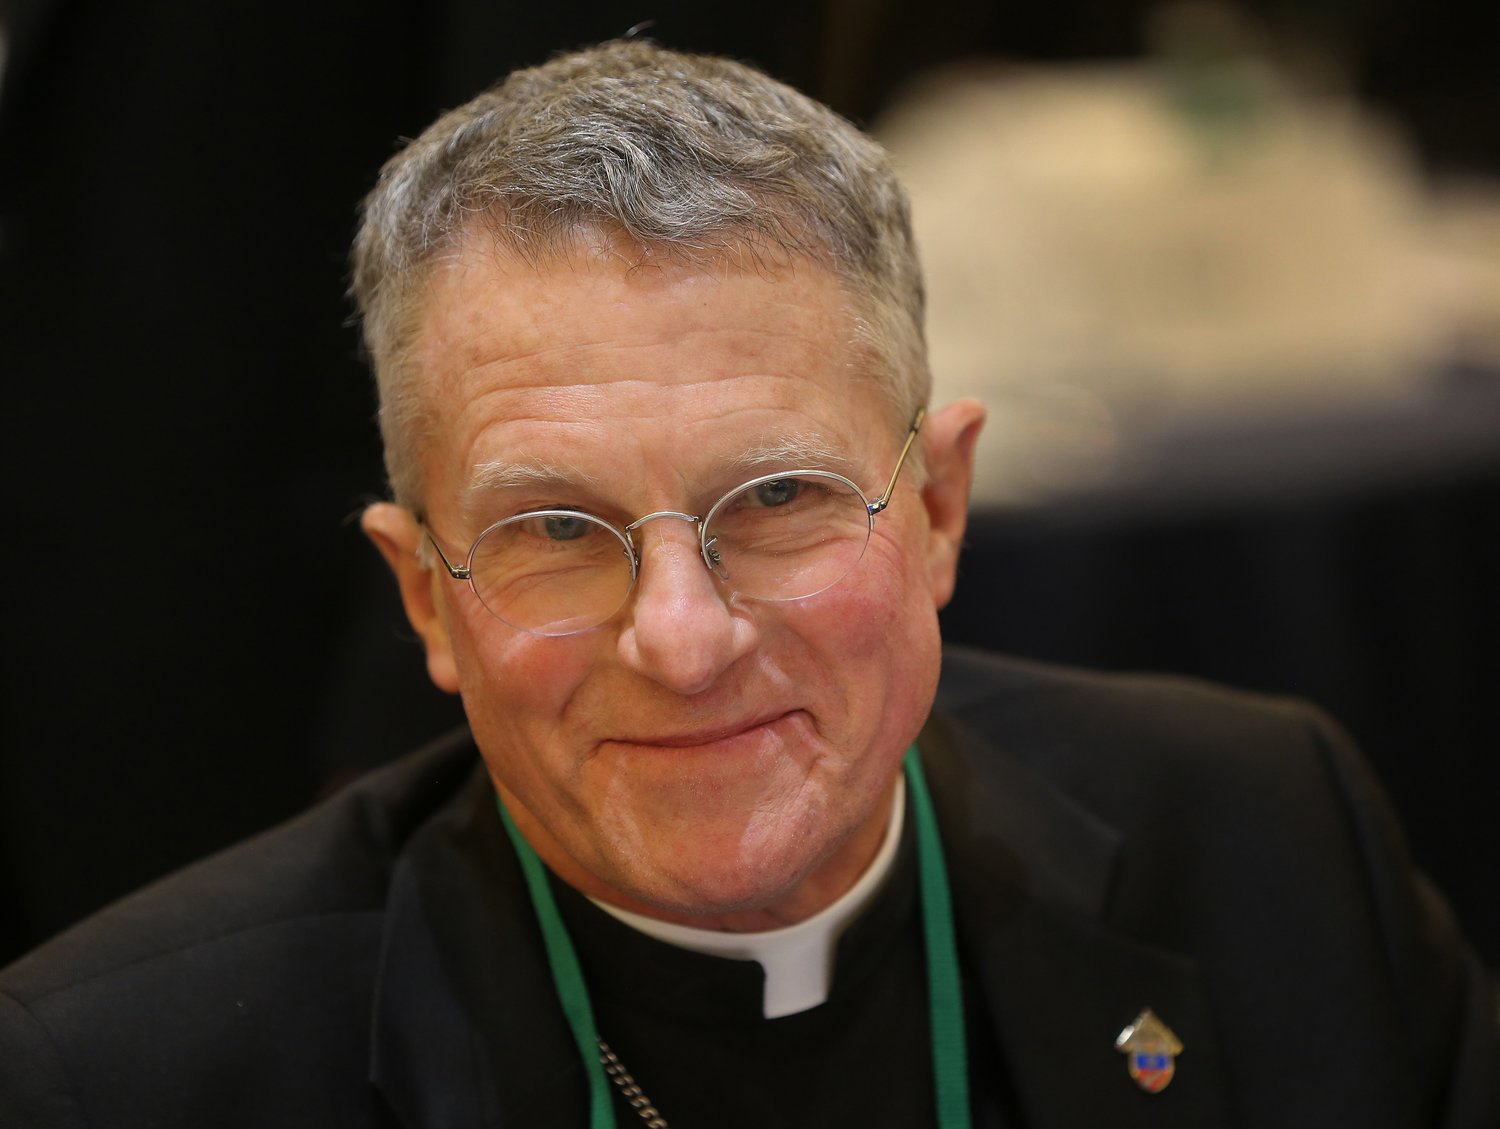 Archbishop Timothy P. Broglio of the U.S. Archdiocese for the Military Services smiles Nov. 15 after being elected president of the U.S. Conference of Catholic Bishops during a session of the fall general assembly of the bishops in Baltimore.